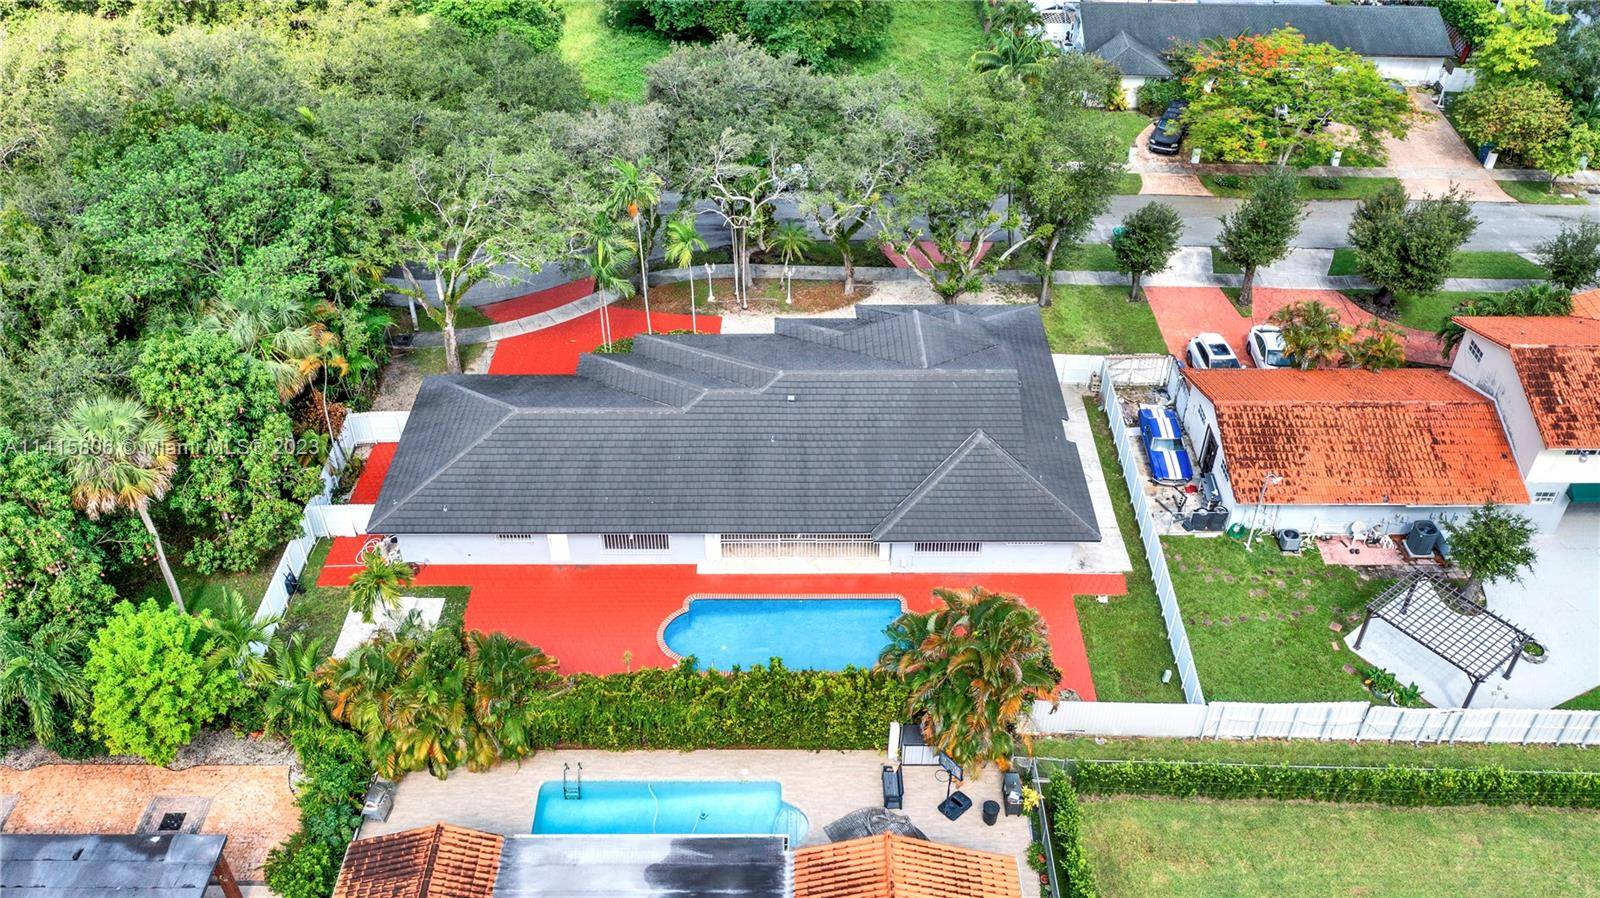 Experience South Florida living in this stunning and spacious single family residence.